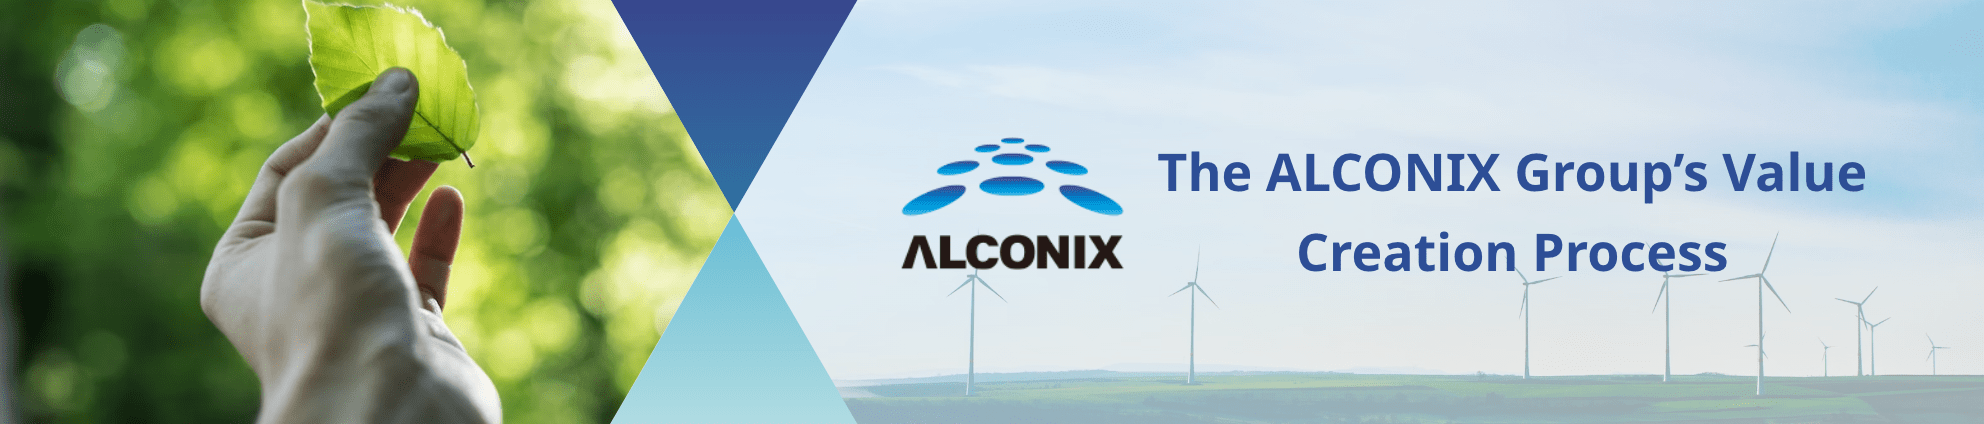 The ALCONIX Group’s Value Creation Process